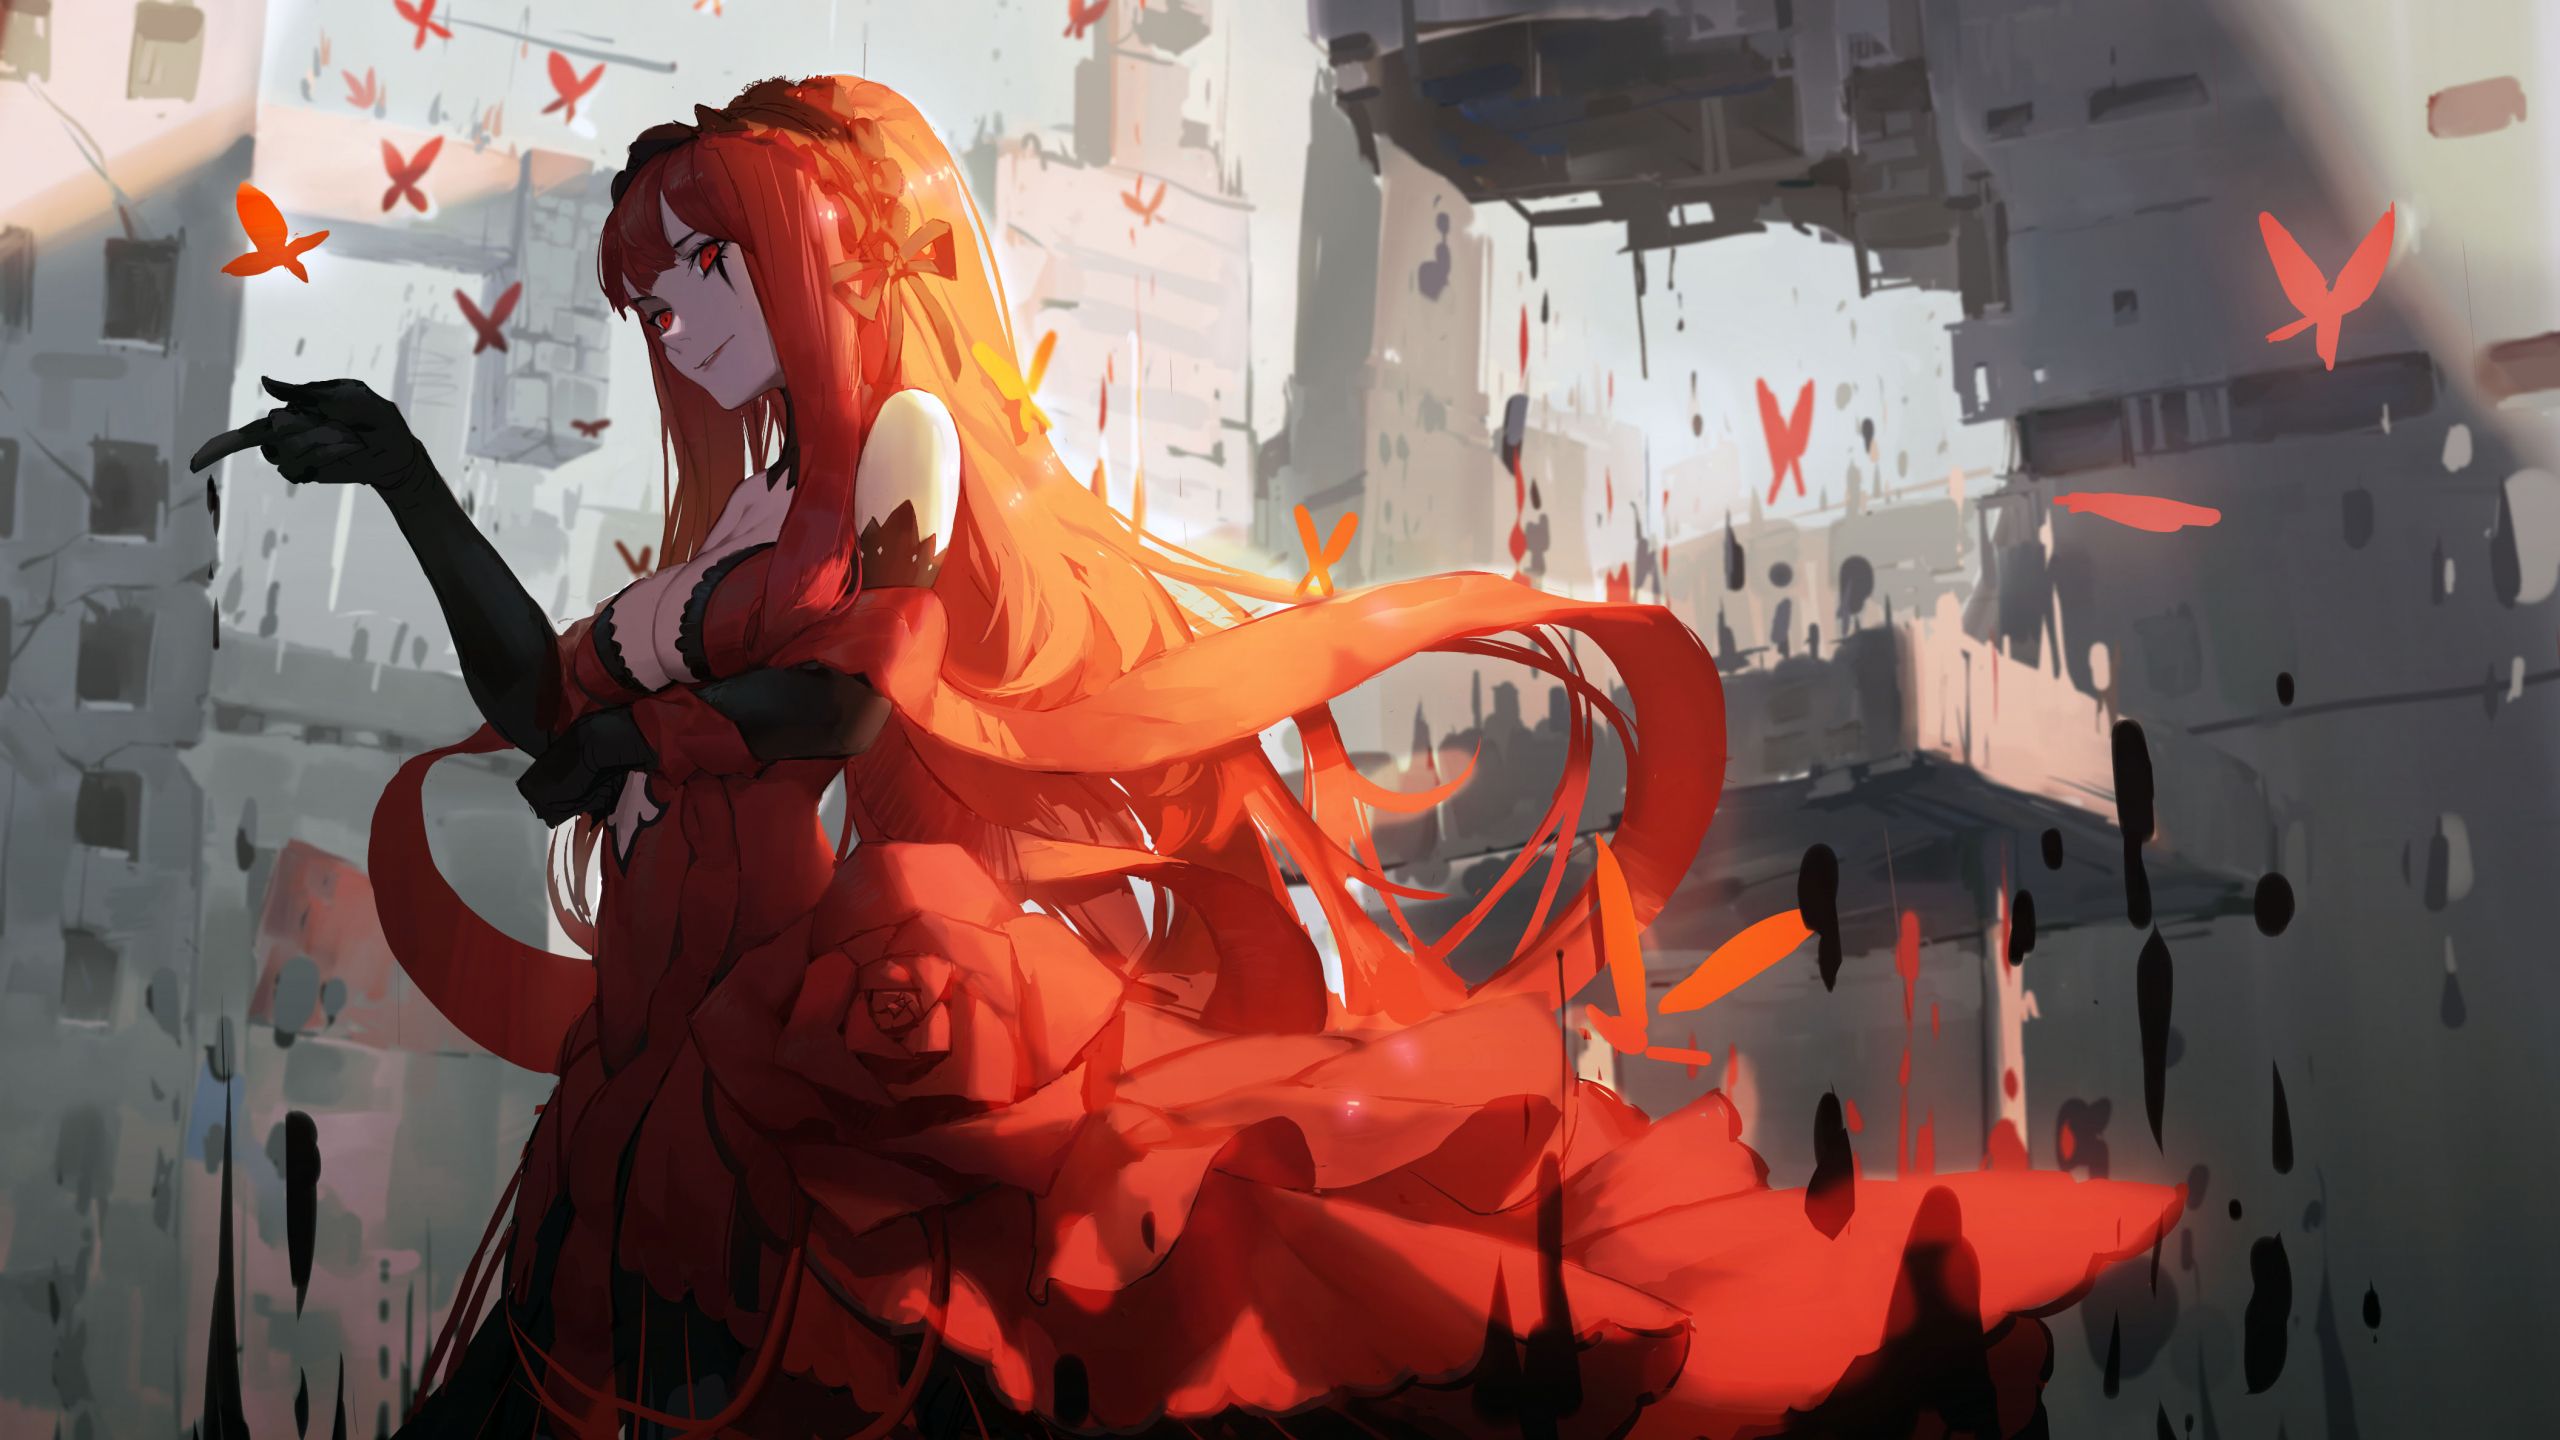 Desktop Wallpapers Red Head, Anime Girl, Original, 4k, Hd Image, Picture, Background, 103e25